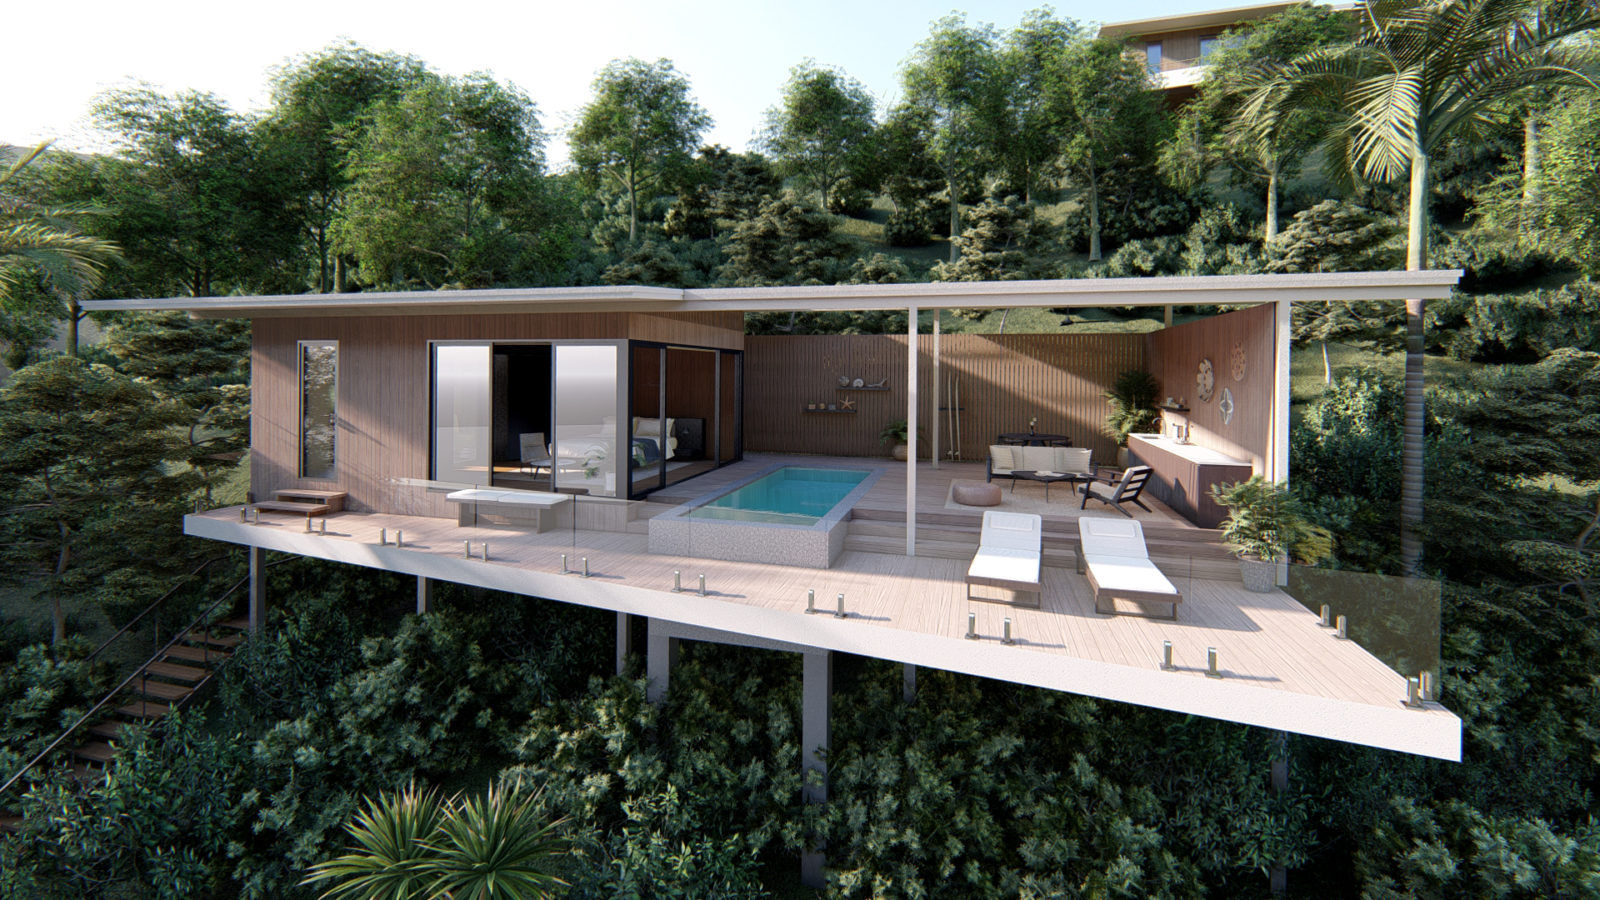 How Would You Like to Own a Sustainable, Precrafted Surf Villa in Bali?